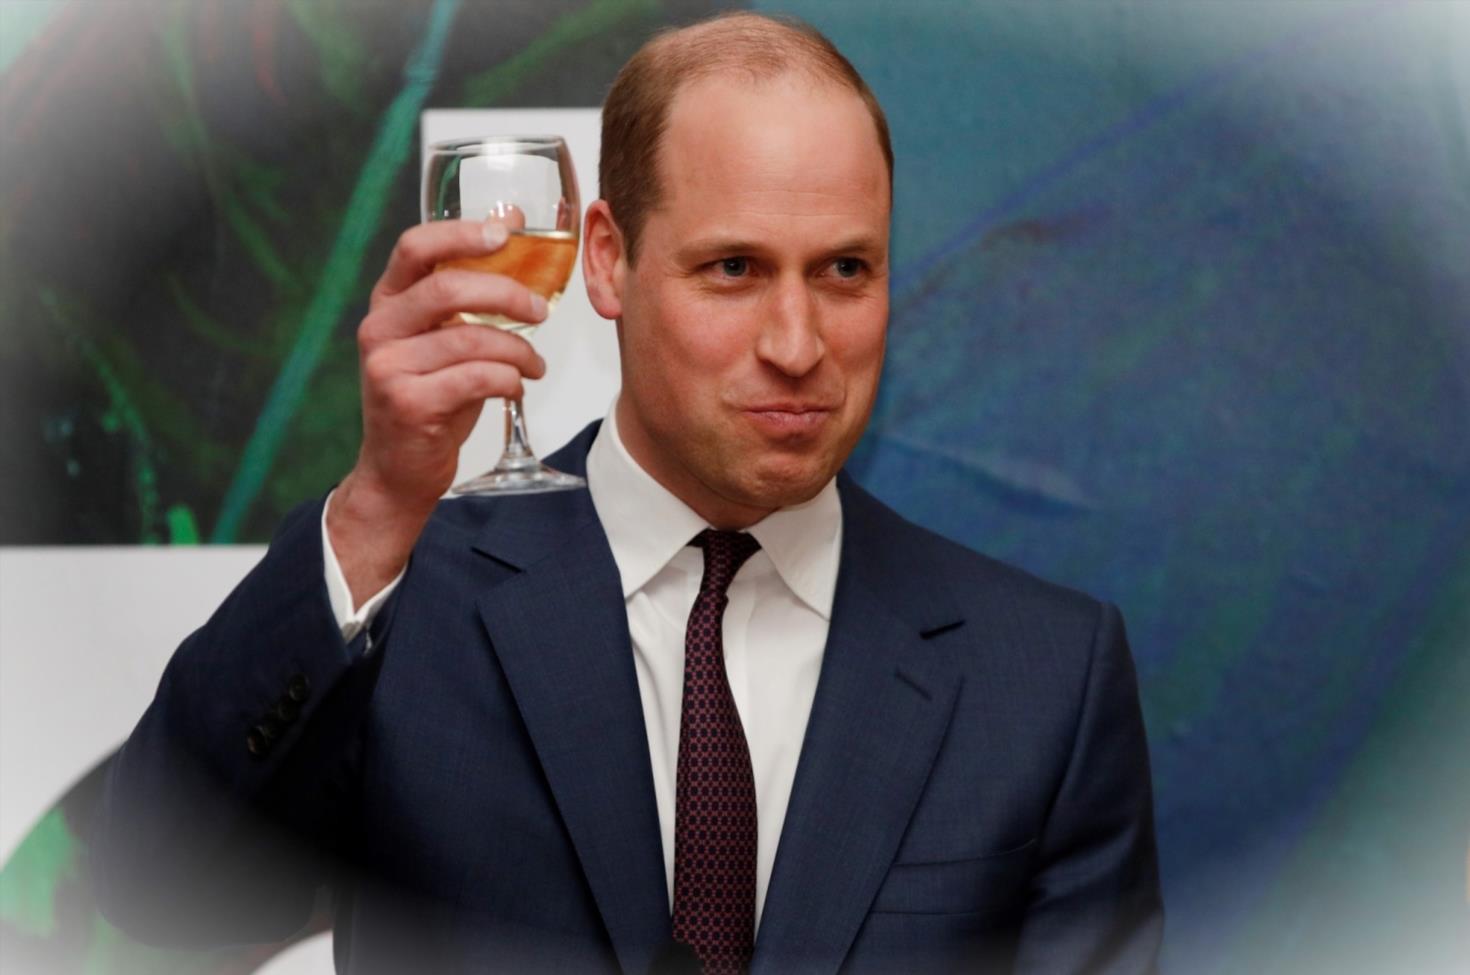 Prince William to Star in ITV Documentary on Homelessness Project2bsoHrN 7